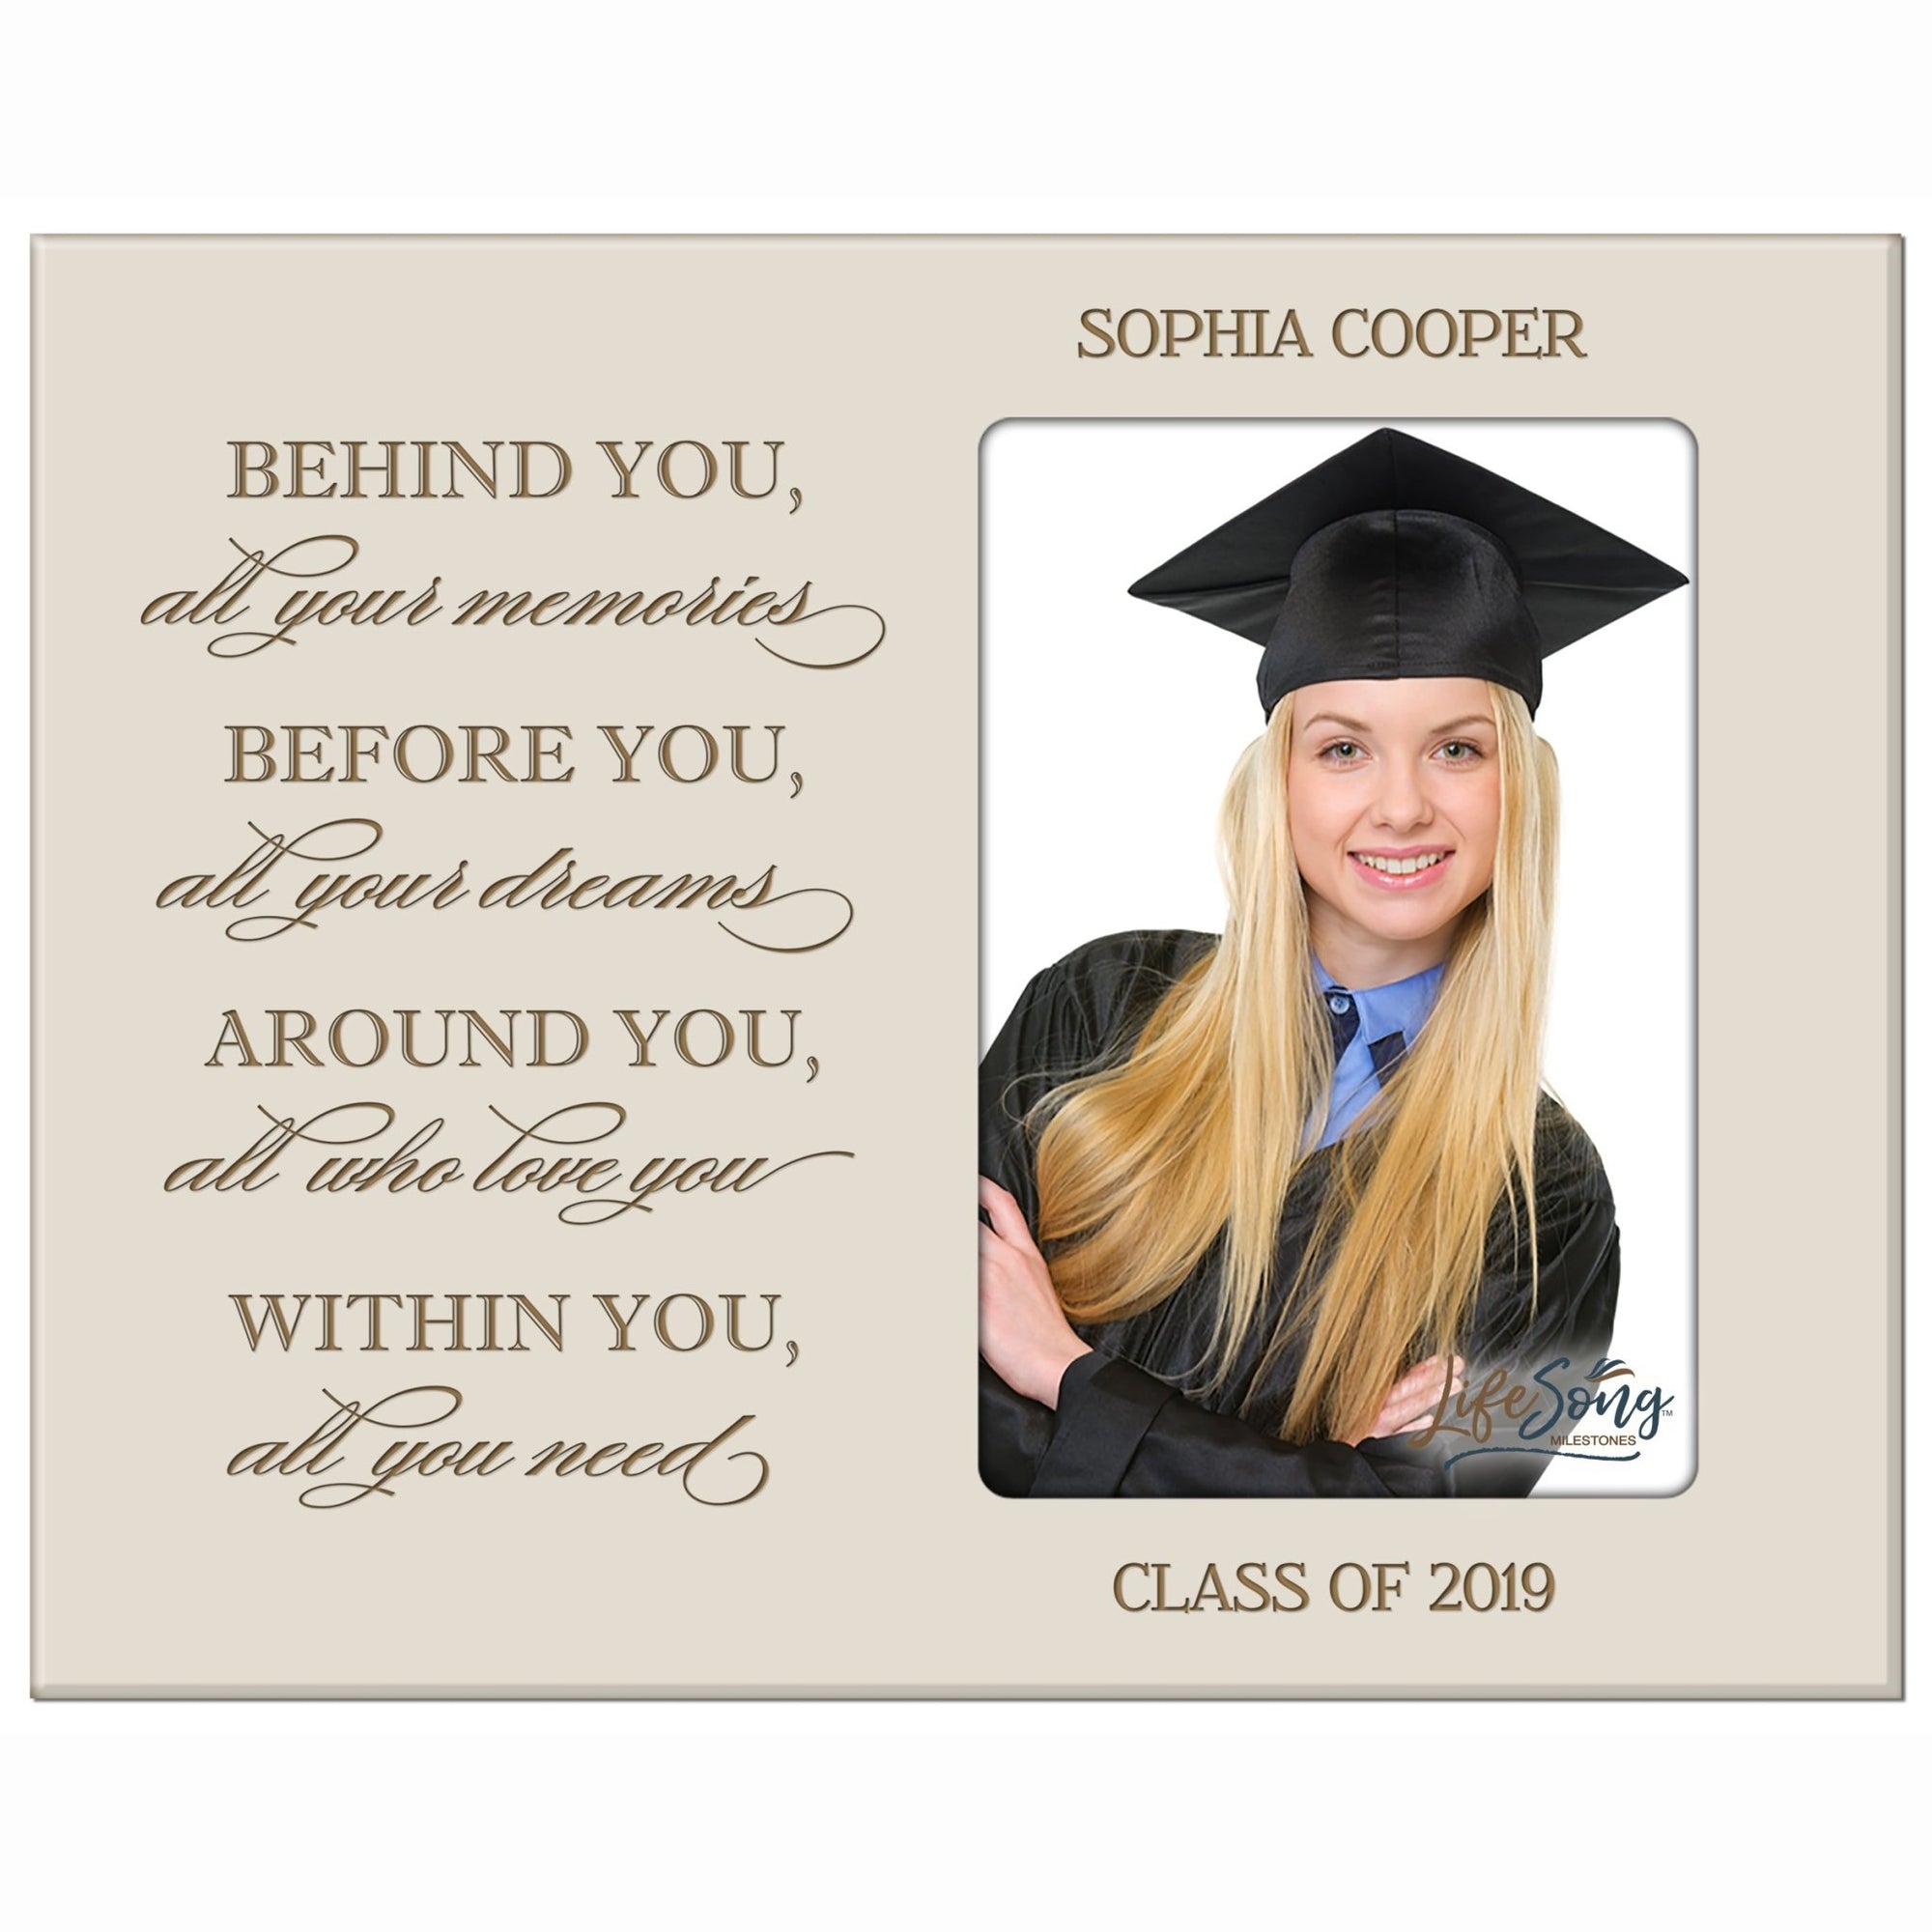 Personalized 8x10 Graduation Vertical Photo Frame Gift - Behind You - LifeSong Milestones